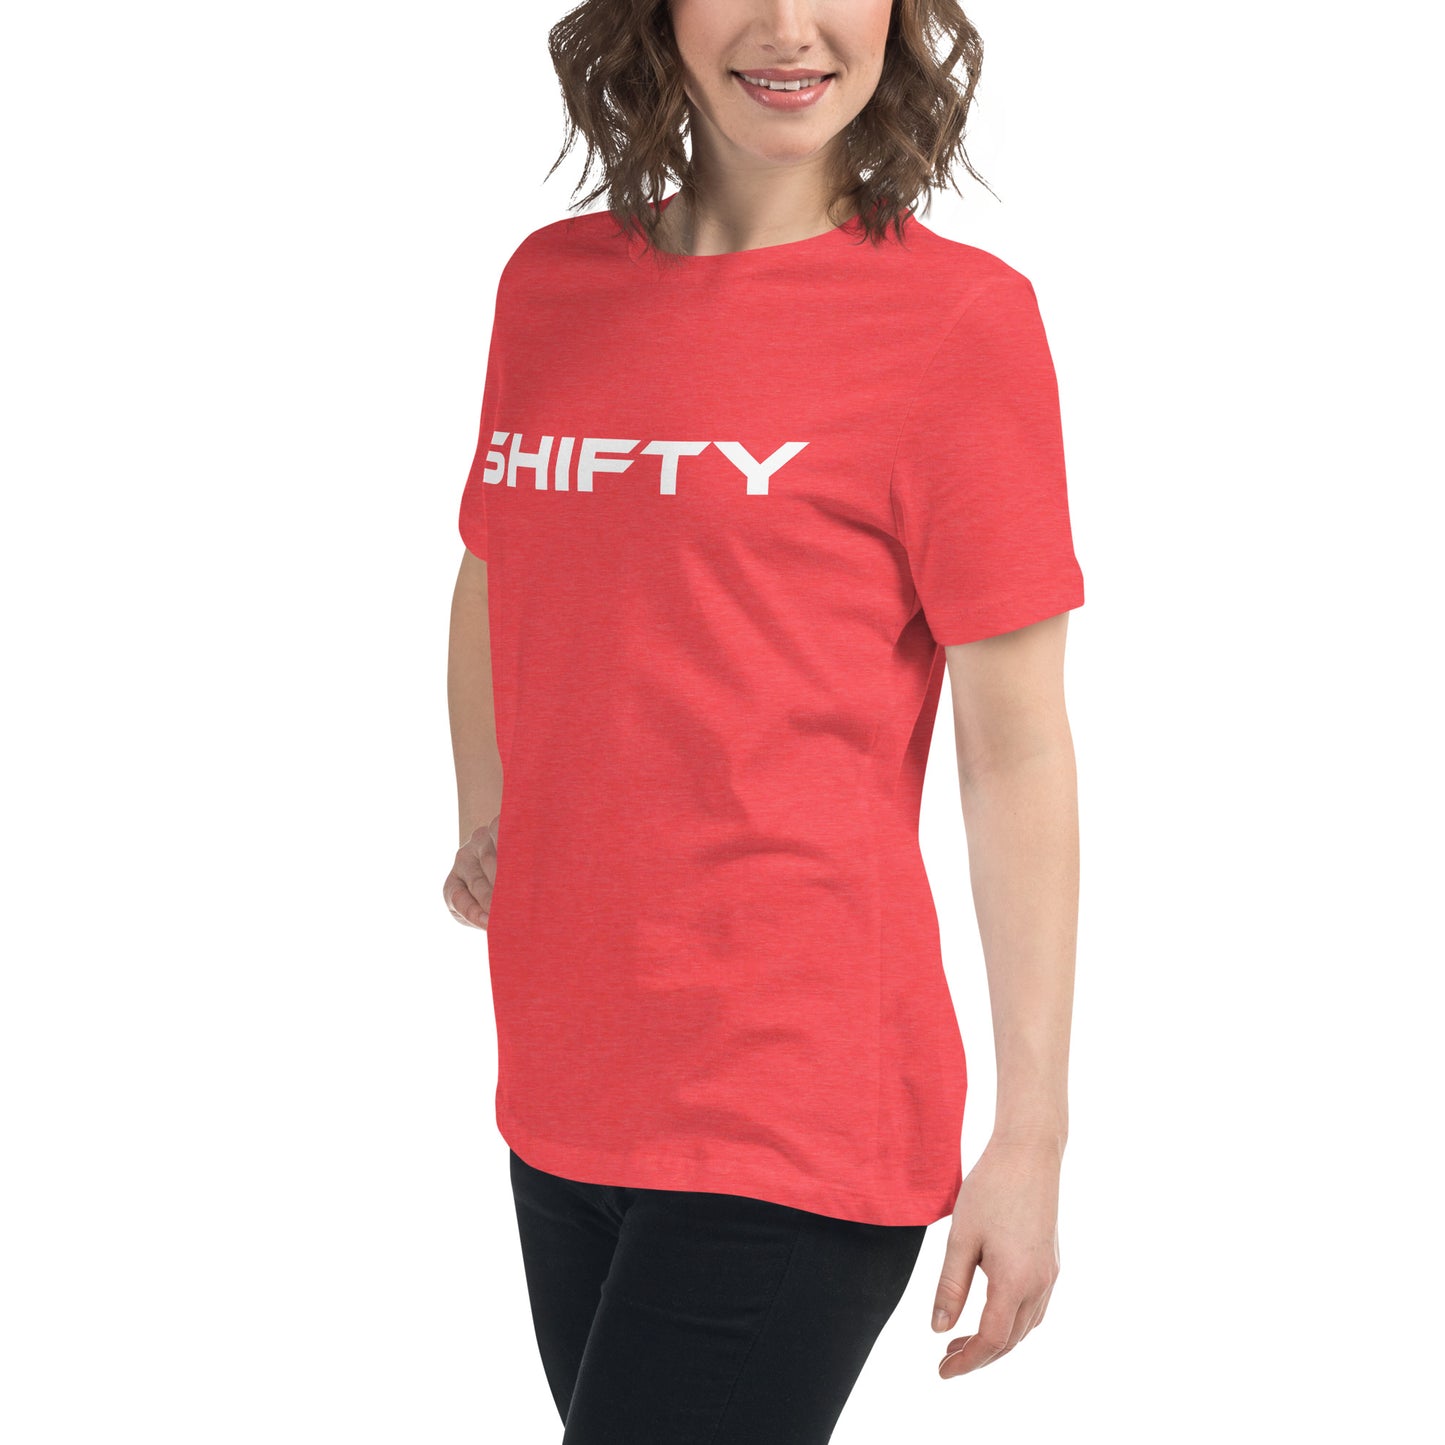 Shifty Women’s Relaxed Fit T-Shirt - Stylish and Comfy Everyday Tee